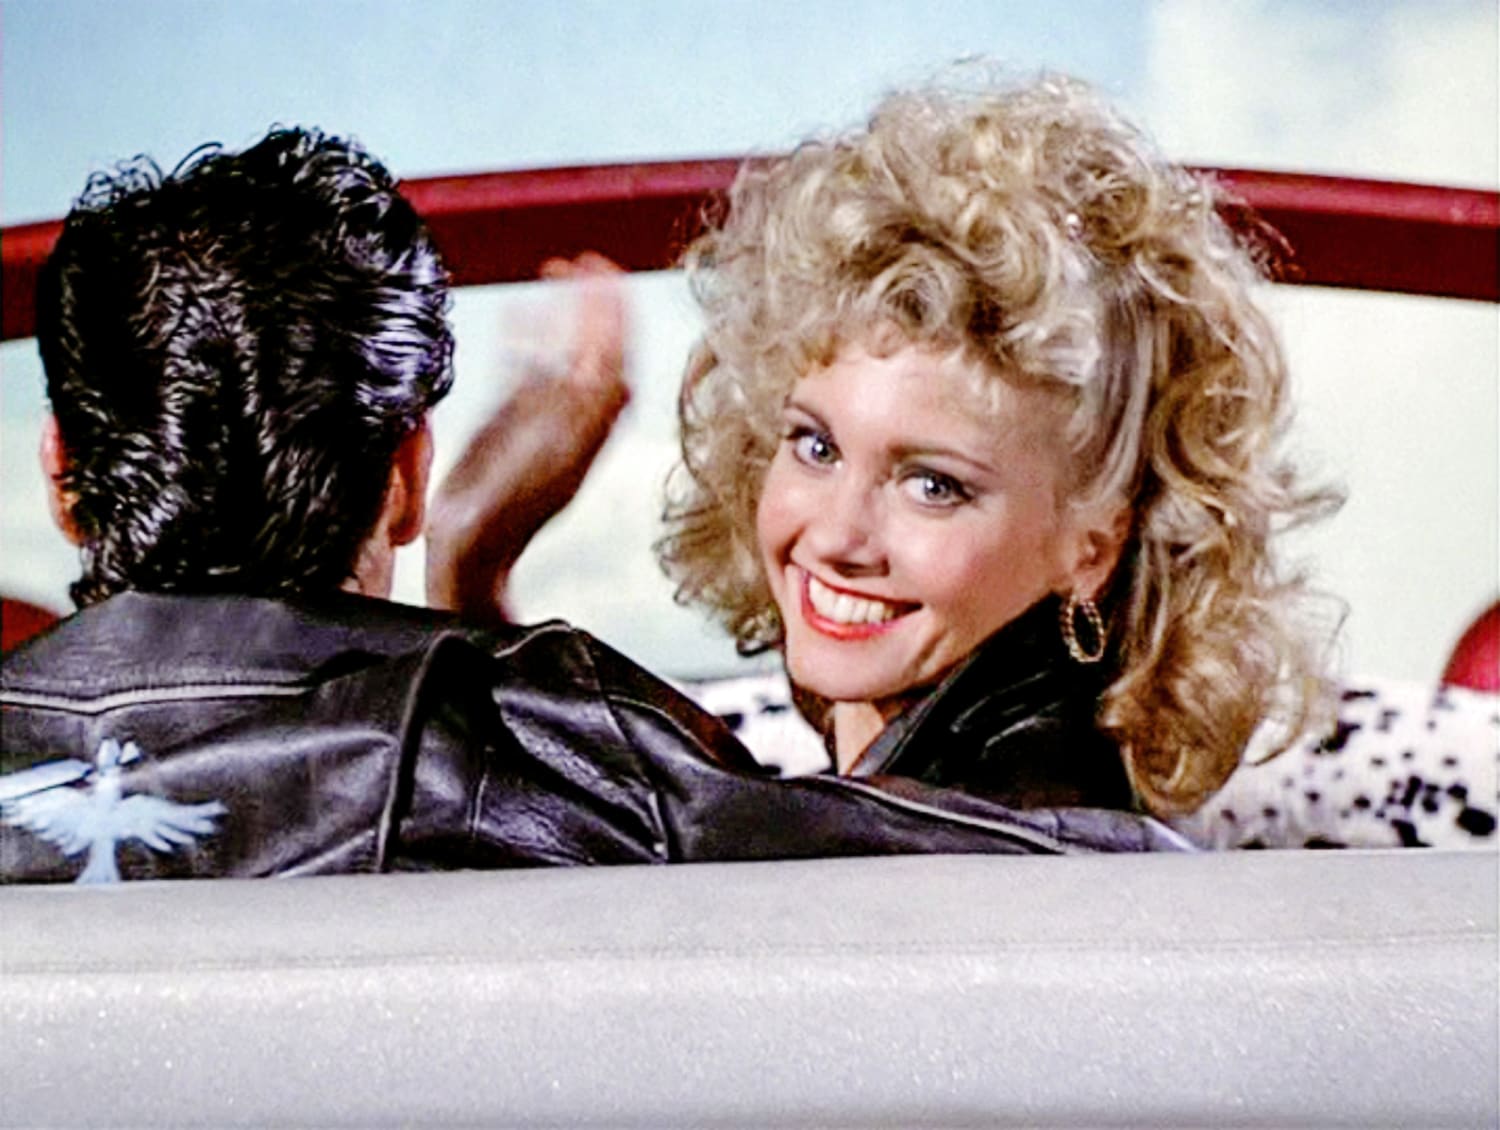 7 'Grease' Facts You May Not Have Known - ABC News